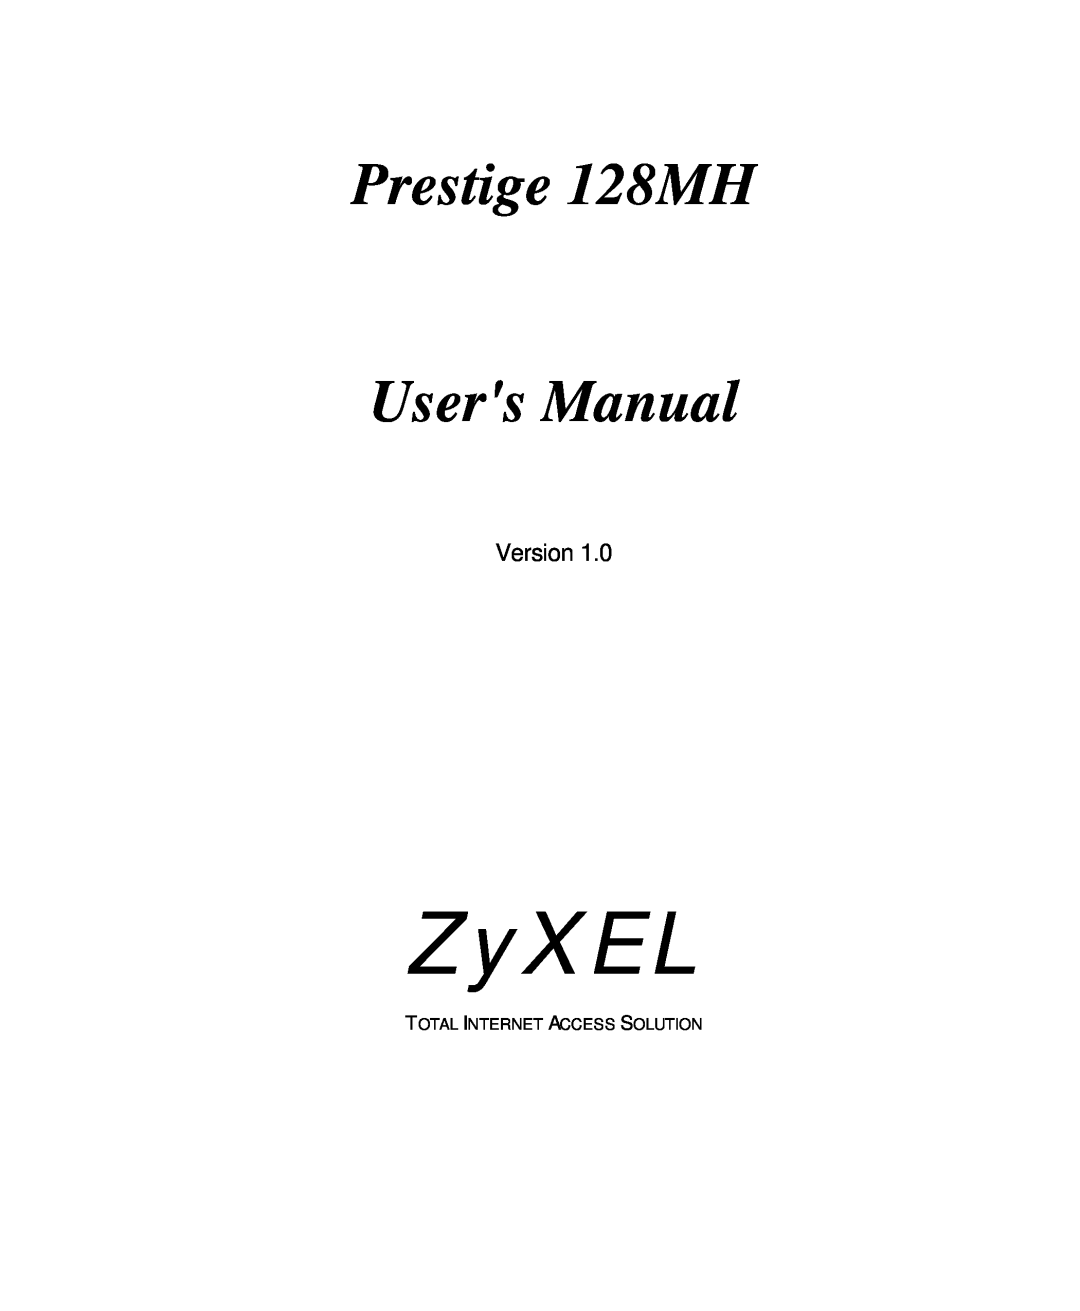 ZyXEL Communications user manual ZyXEL, Prestige 128MH, Users Manual, Version, Total Internet Access Solution 